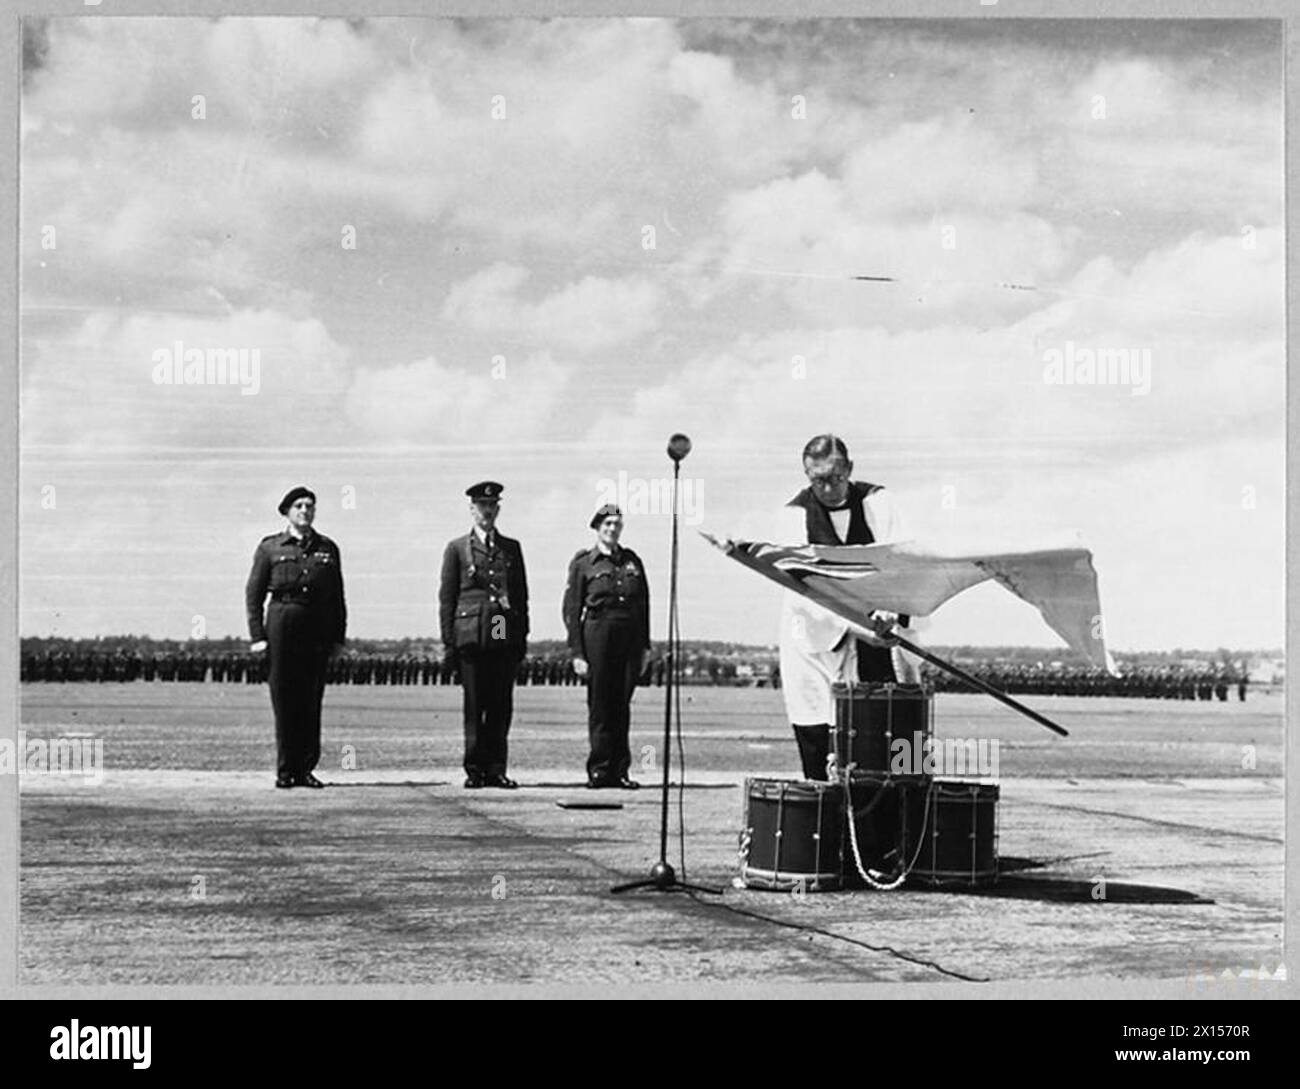 ROYAL OBSERVER CORPS STAND DOWN CEREMONY - 15538 Picture issued 1945 shows - The Dedication of the R.O.C. Ensign by the Chaplain of R.A.F. Station, North Weald, Squadron Leader the Rev. E.S. Doune Royal Air Force Stock Photo